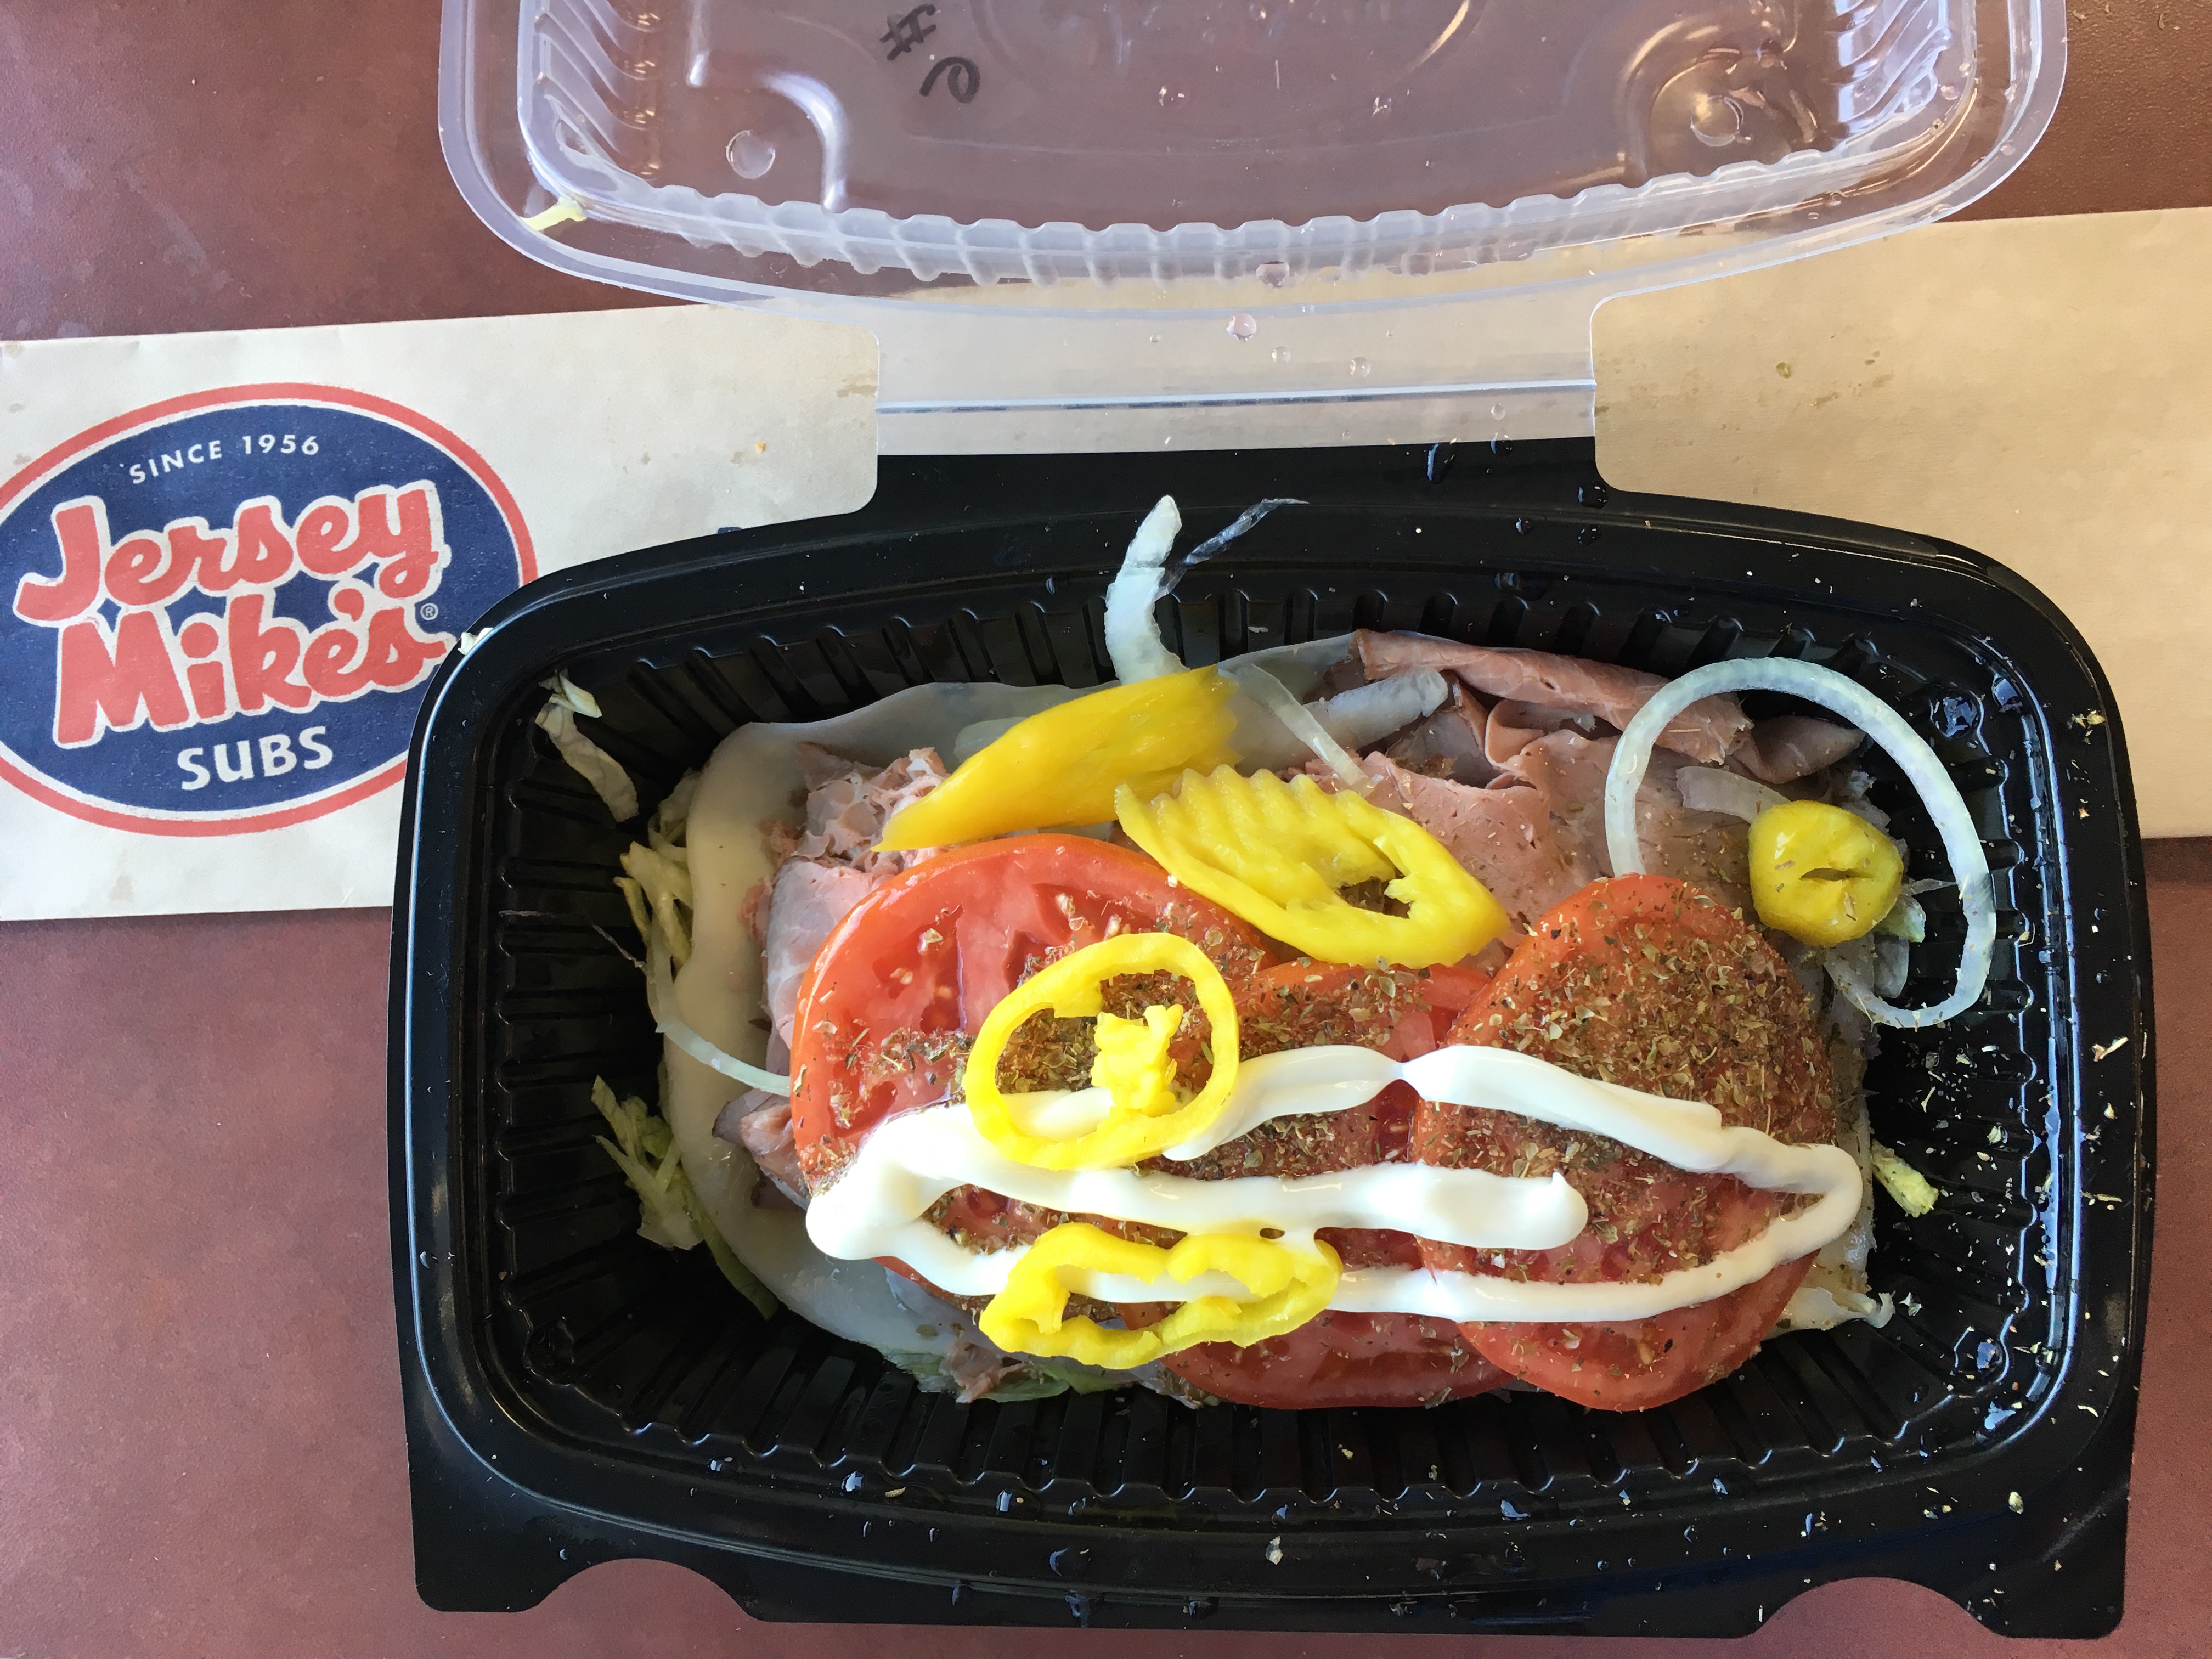 Low Carb Jersey Mikes Sub in a Tub - No 6 Roast Beef and Provolone